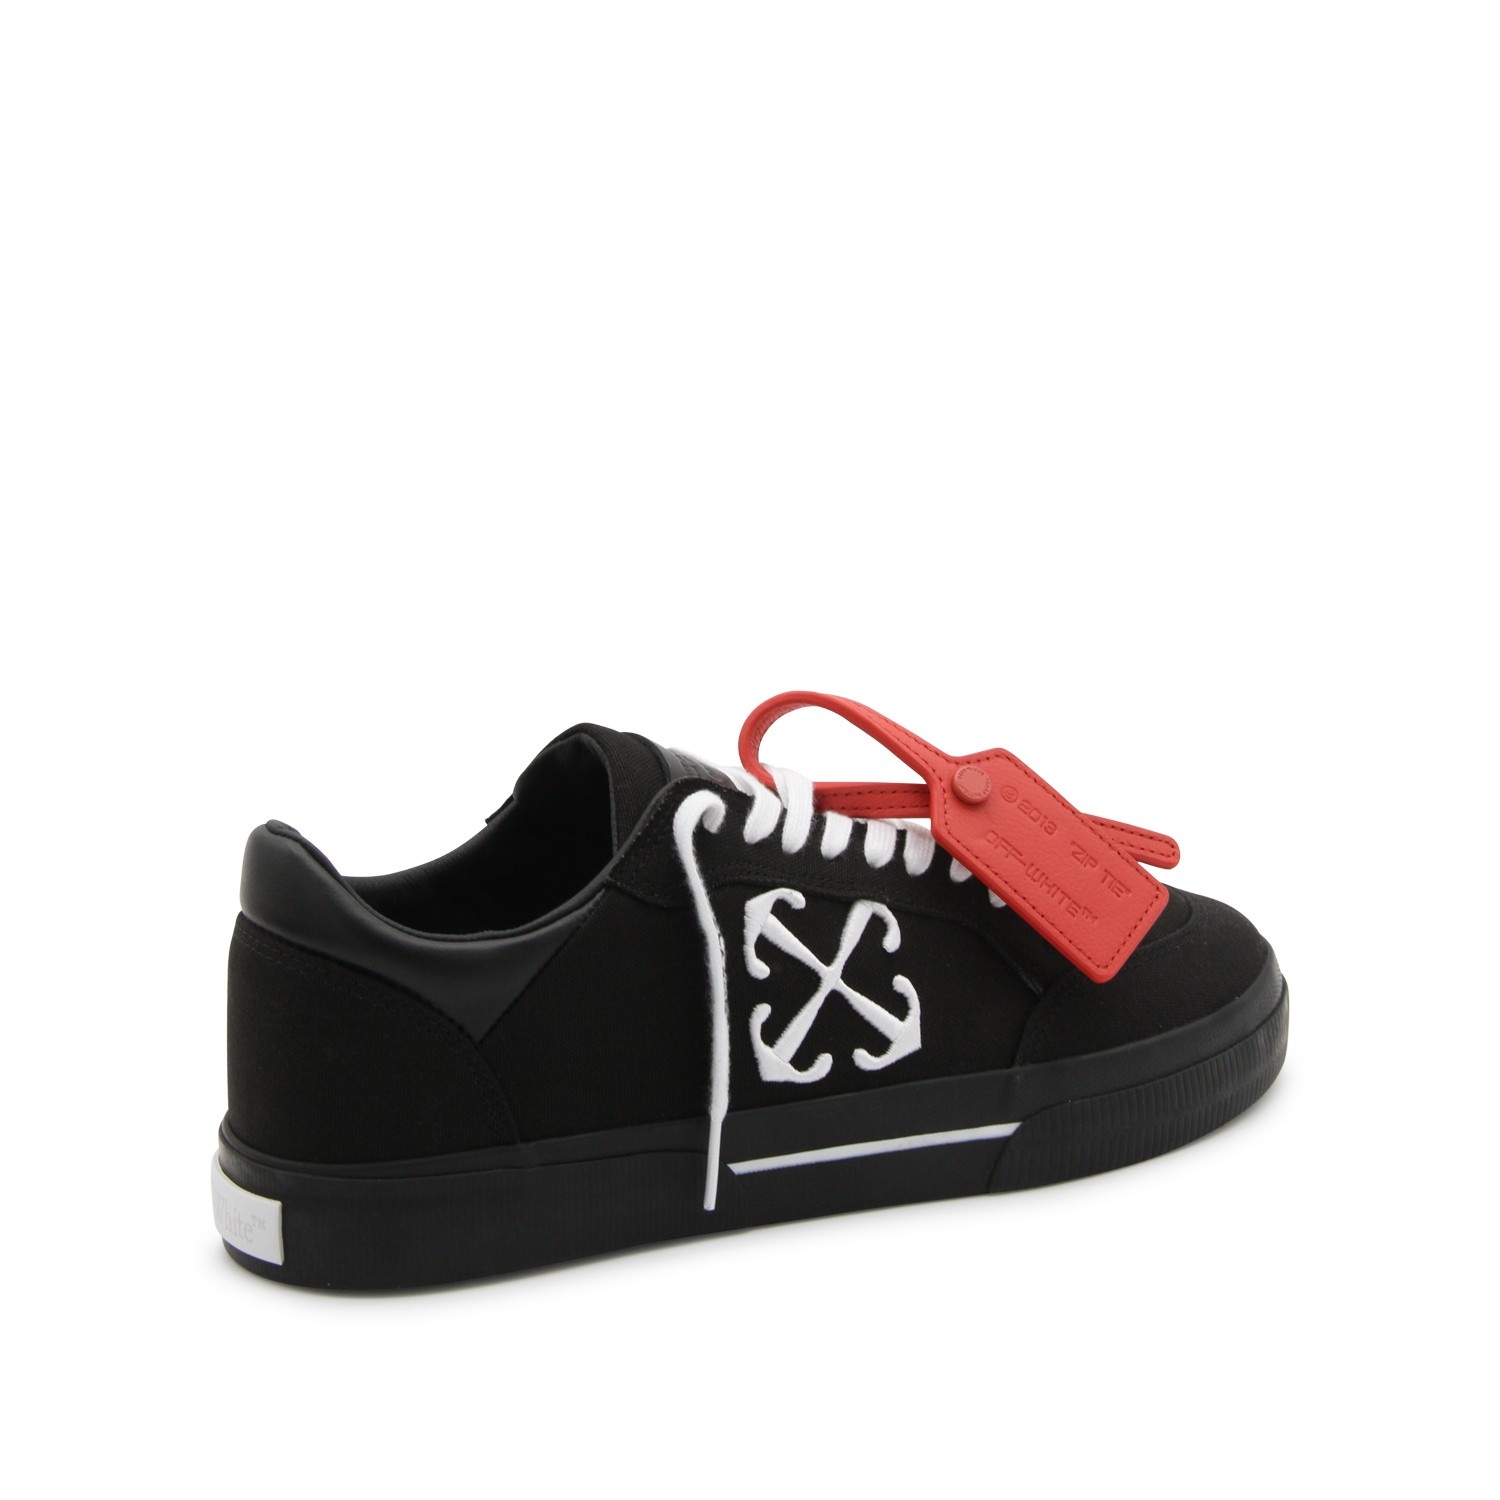 BLACK AND WHITE CANVAS VULCANIZED SNEAKERS - 3